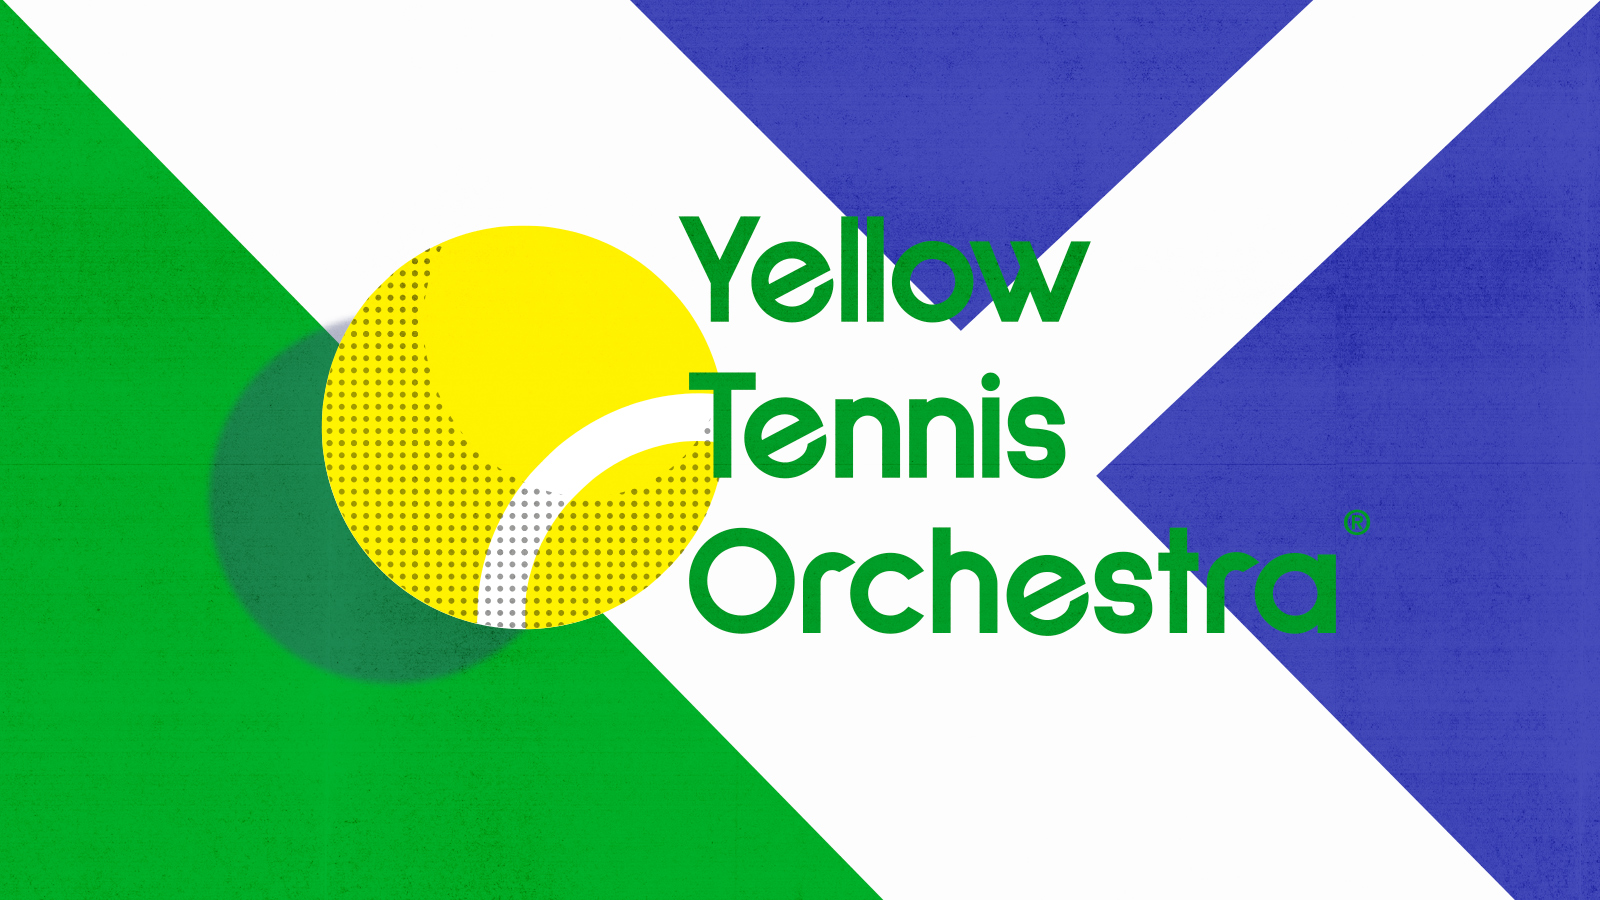 Yellow Tennis Orchestra